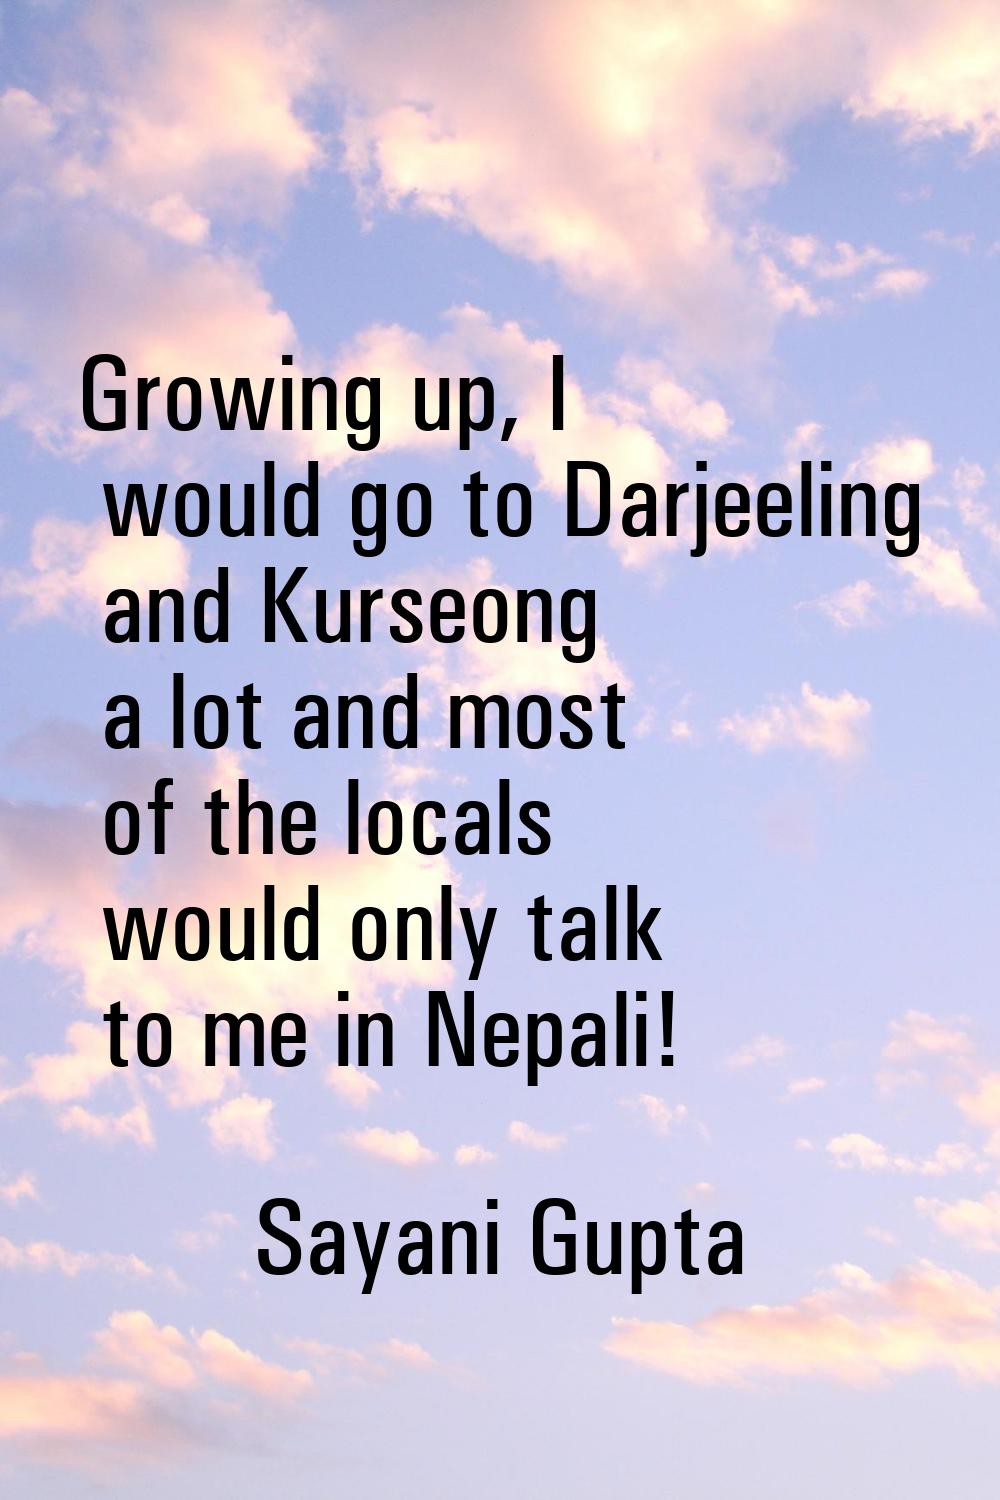 Growing up, I would go to Darjeeling and Kurseong a lot and most of the locals would only talk to m